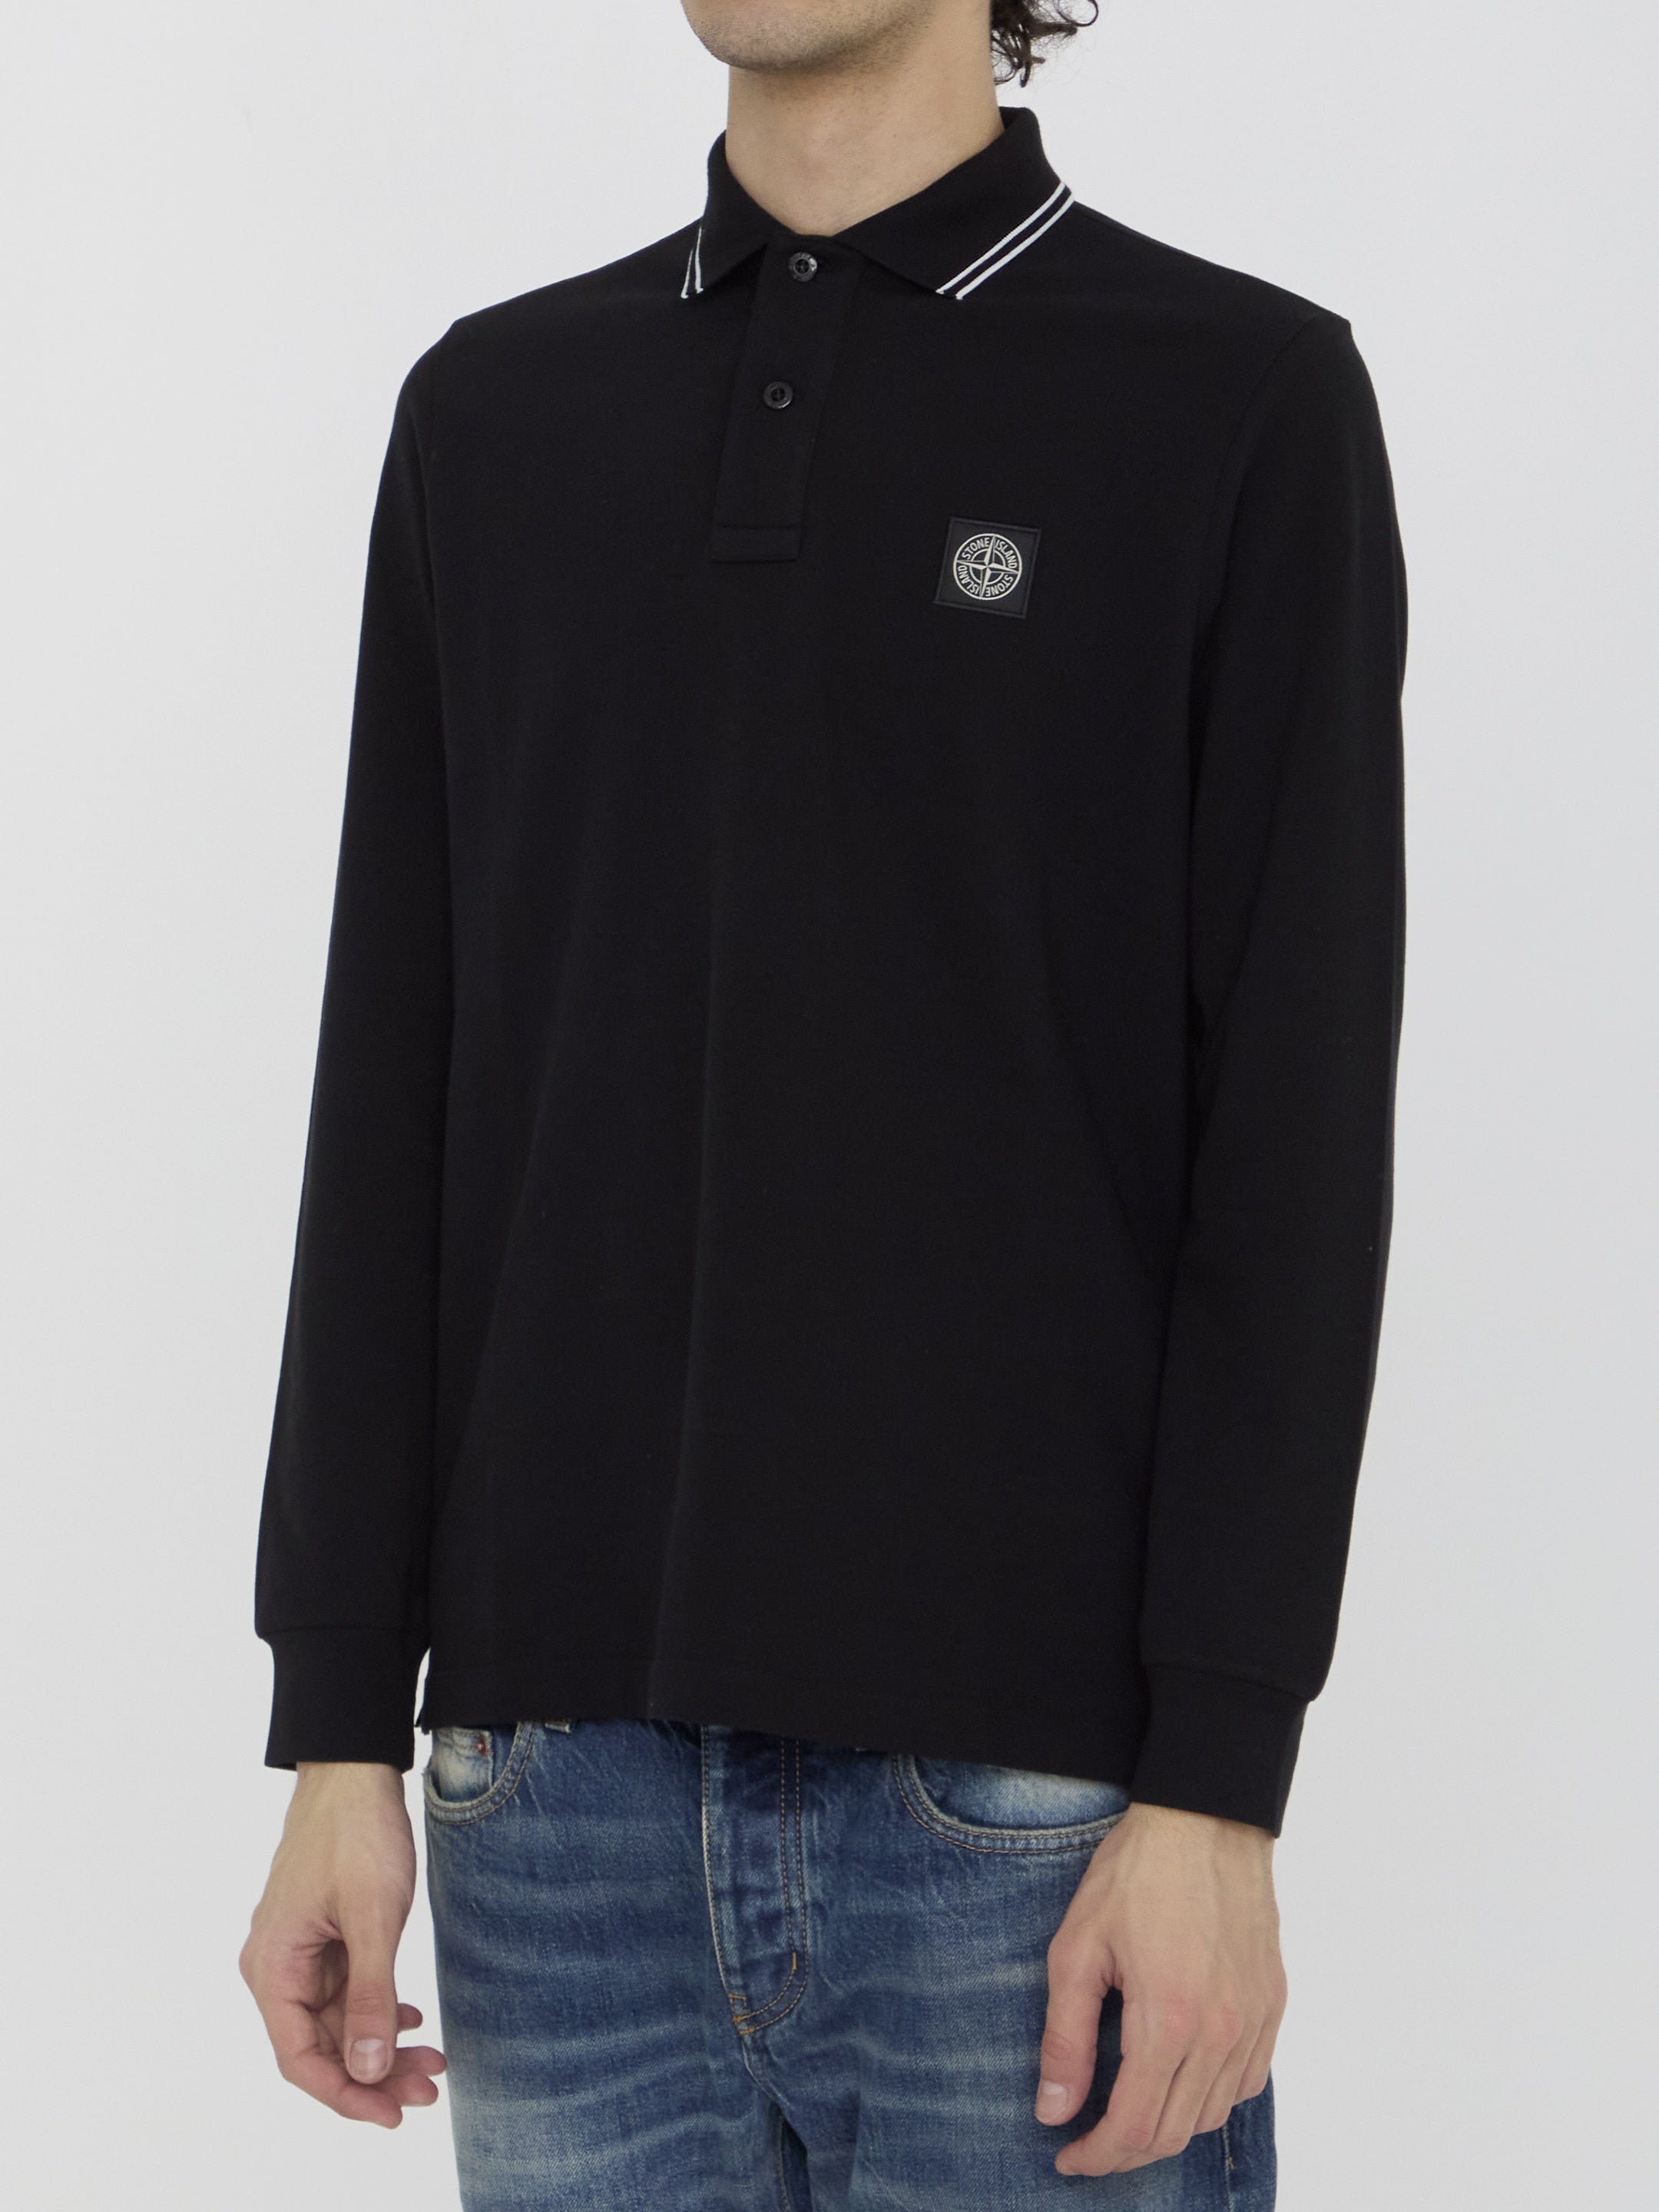 STONE-ISLAND-OUTLET-SALE-Logo-polo-shirt-Shirts-ARCHIVE-COLLECTION-2.jpg